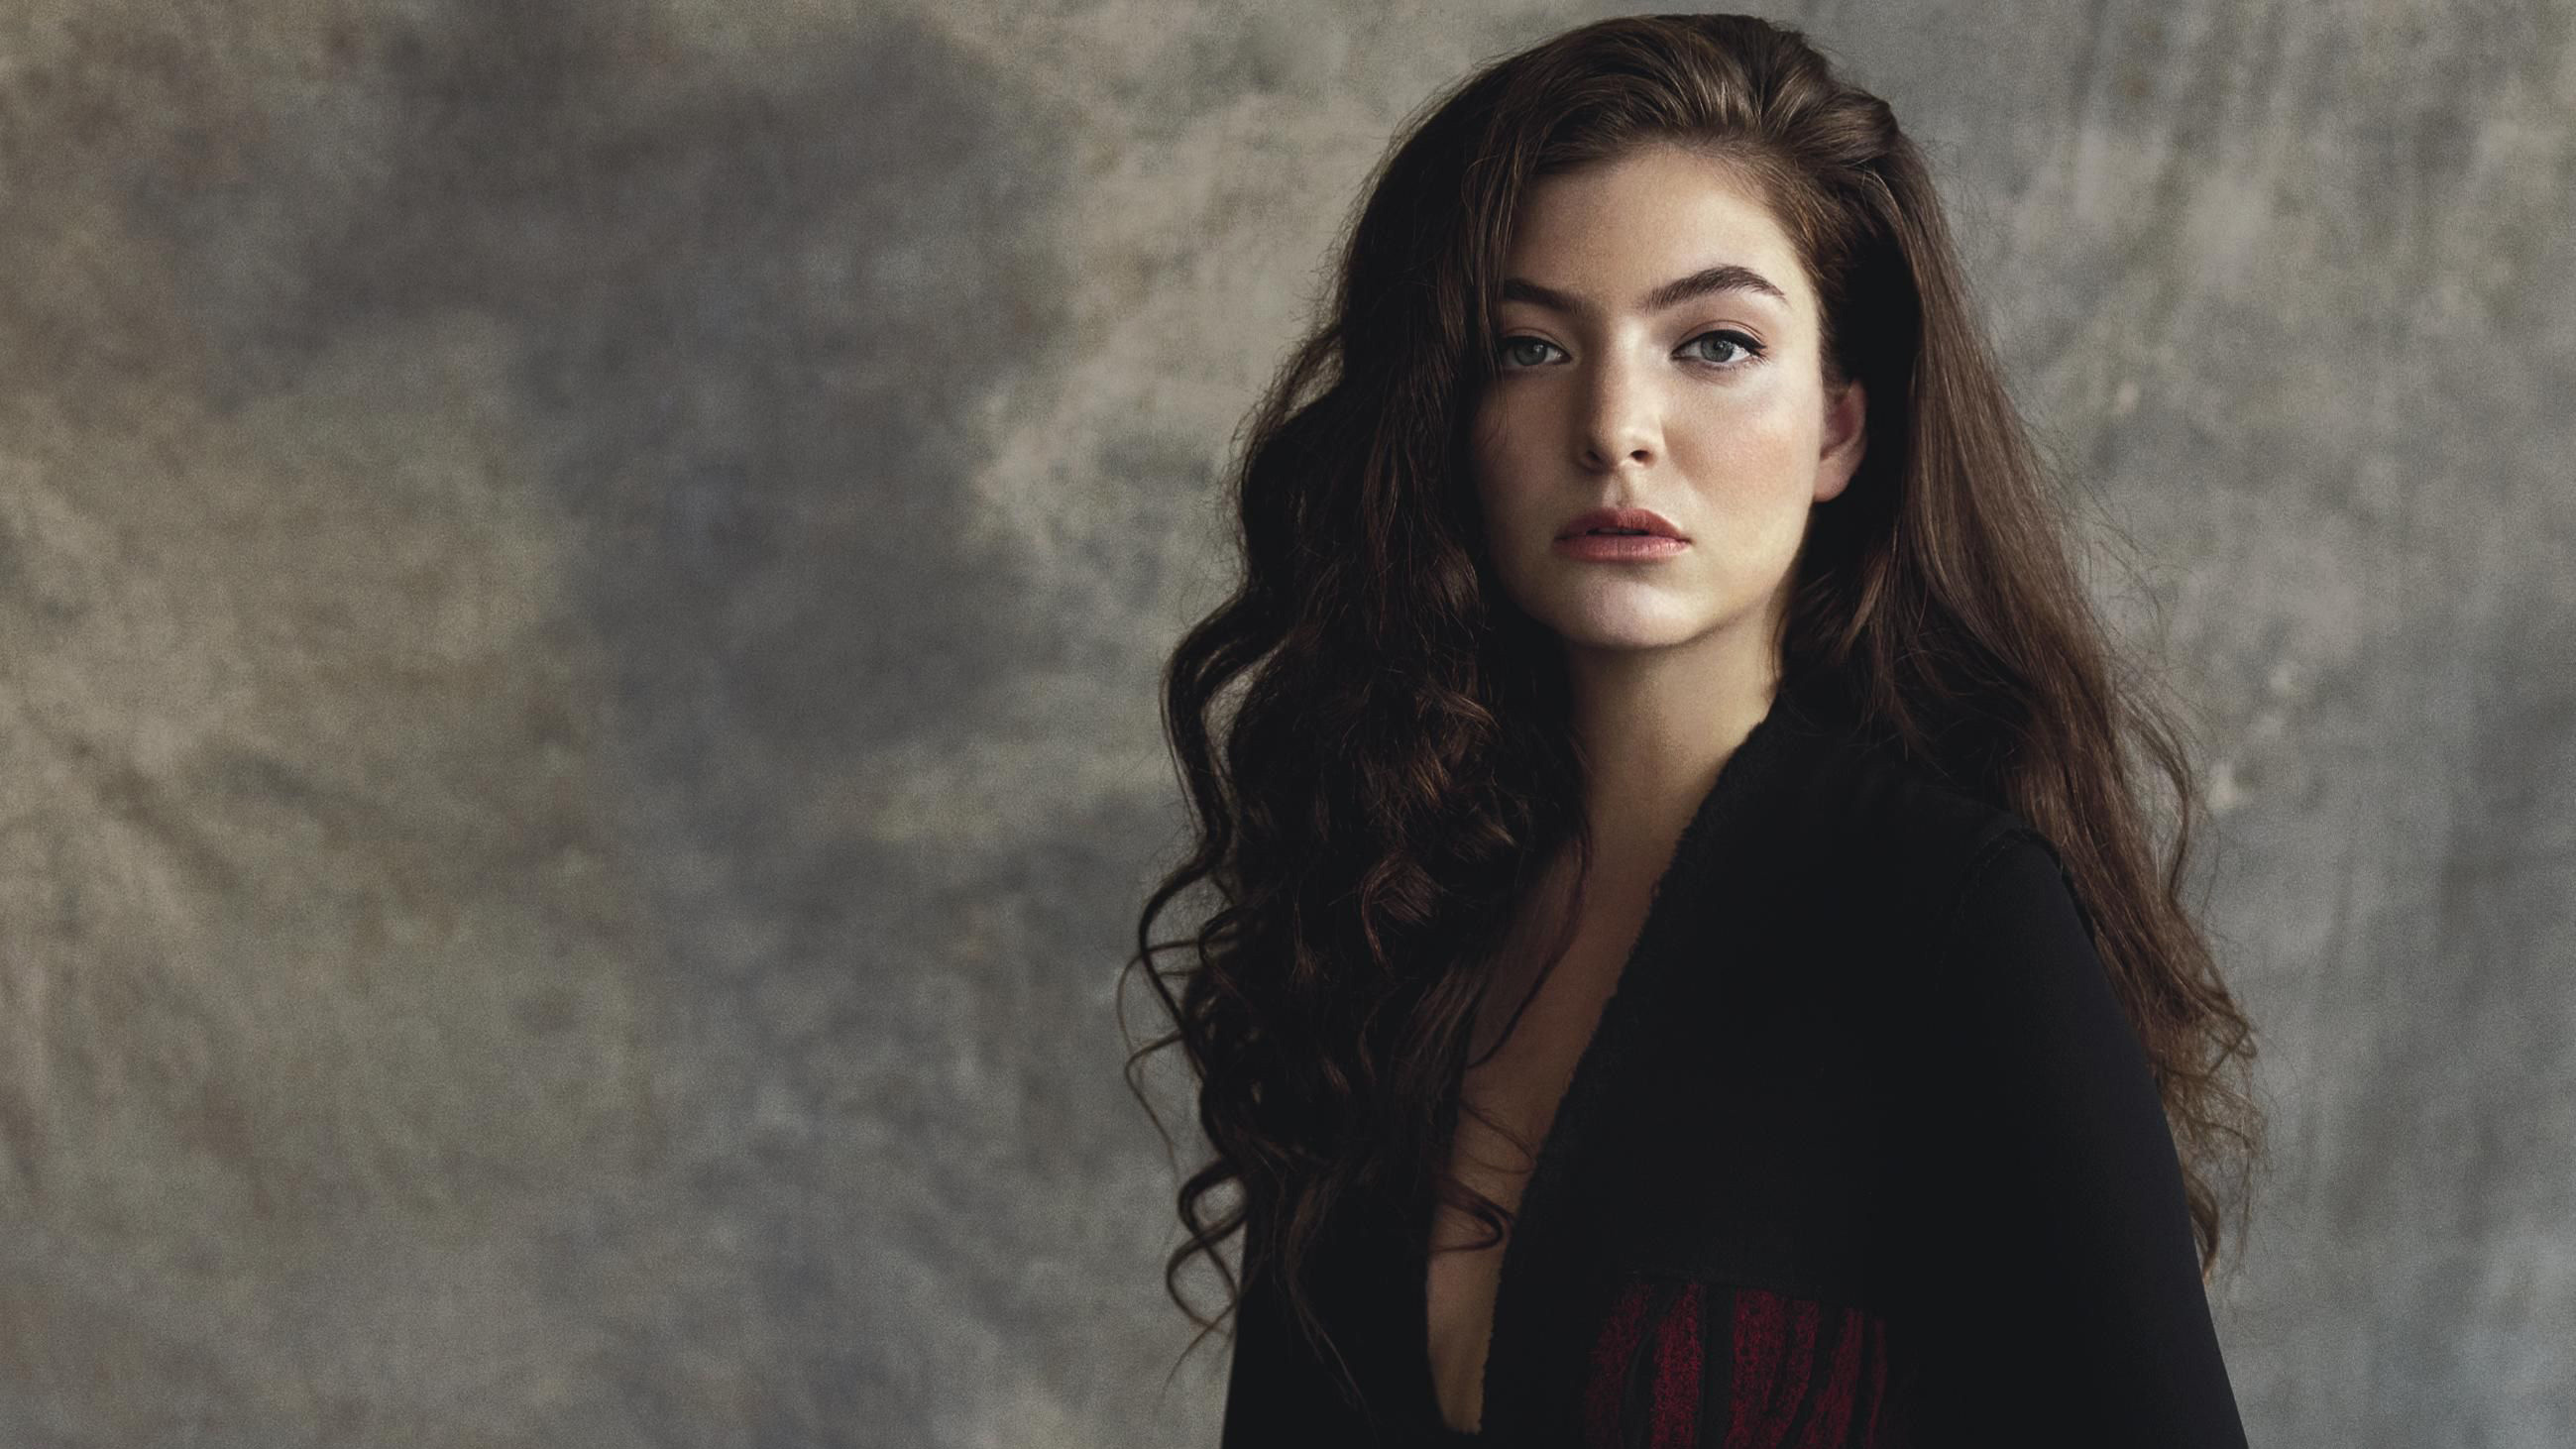 Lorde in Vogue Australia, HD celebrity wallpapers, Stunning images, Captivating photos, 2600x1470 HD Desktop